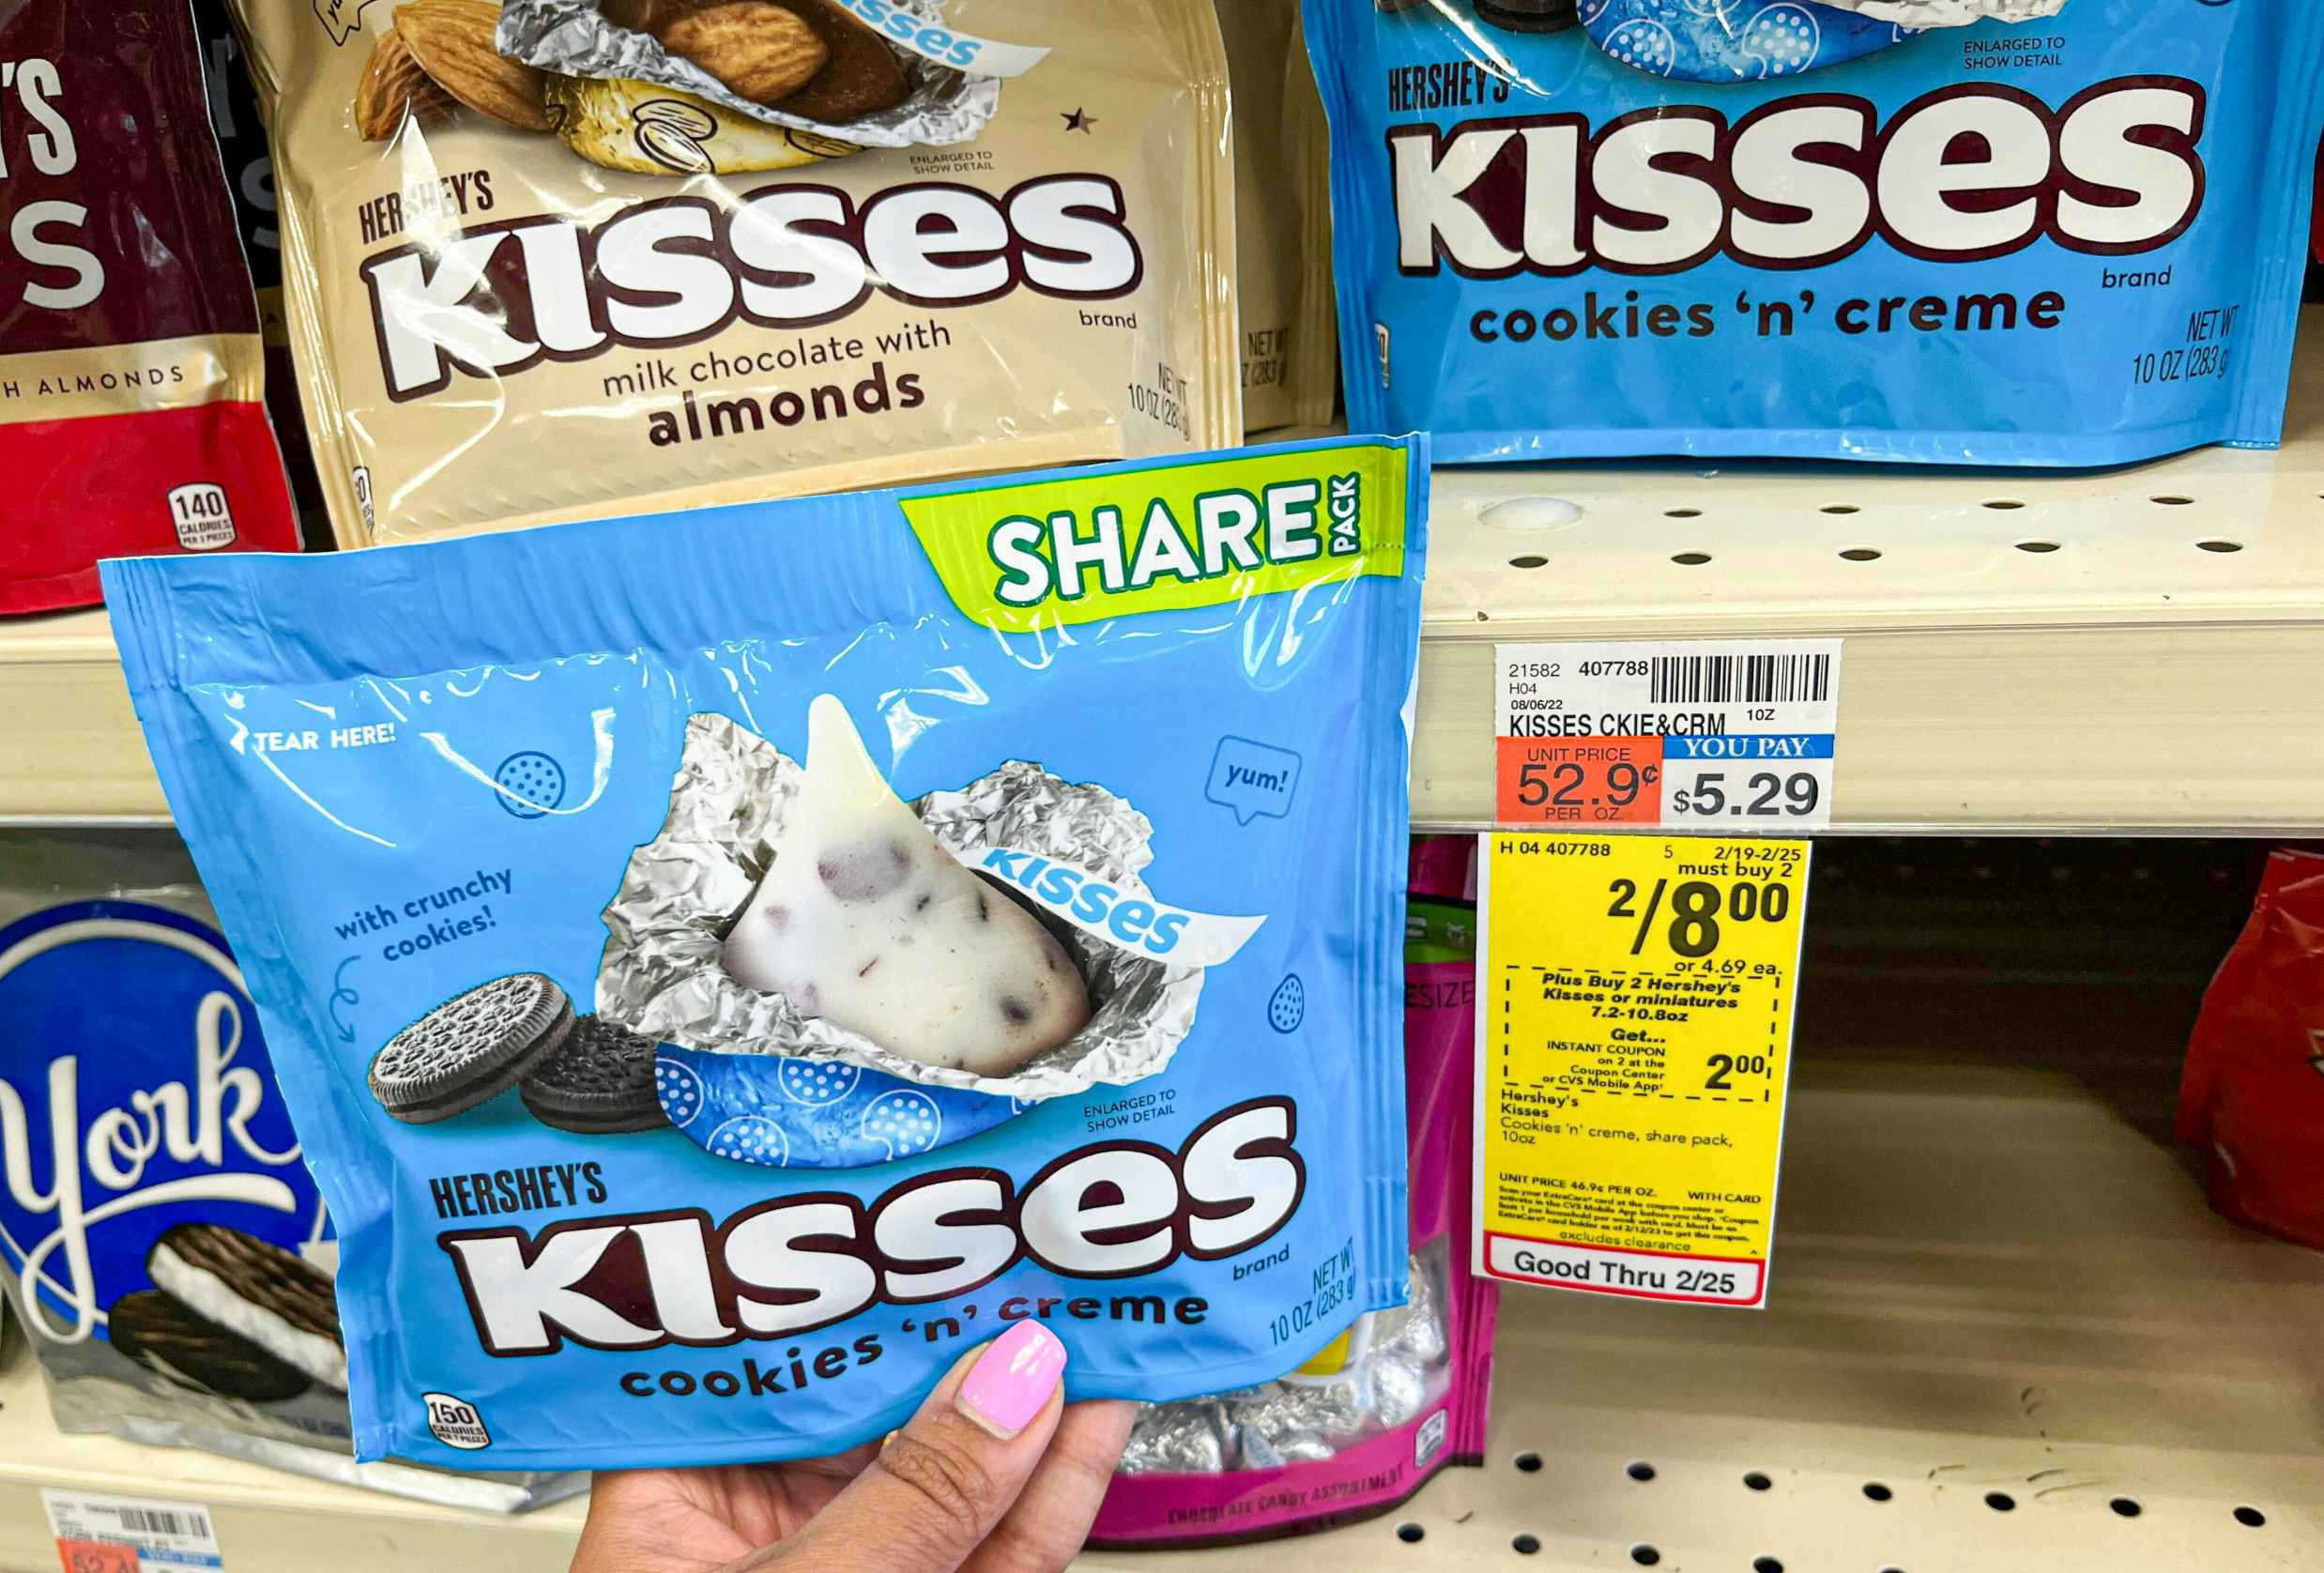 hand holding bag of Hershey's kisses next to sales tag